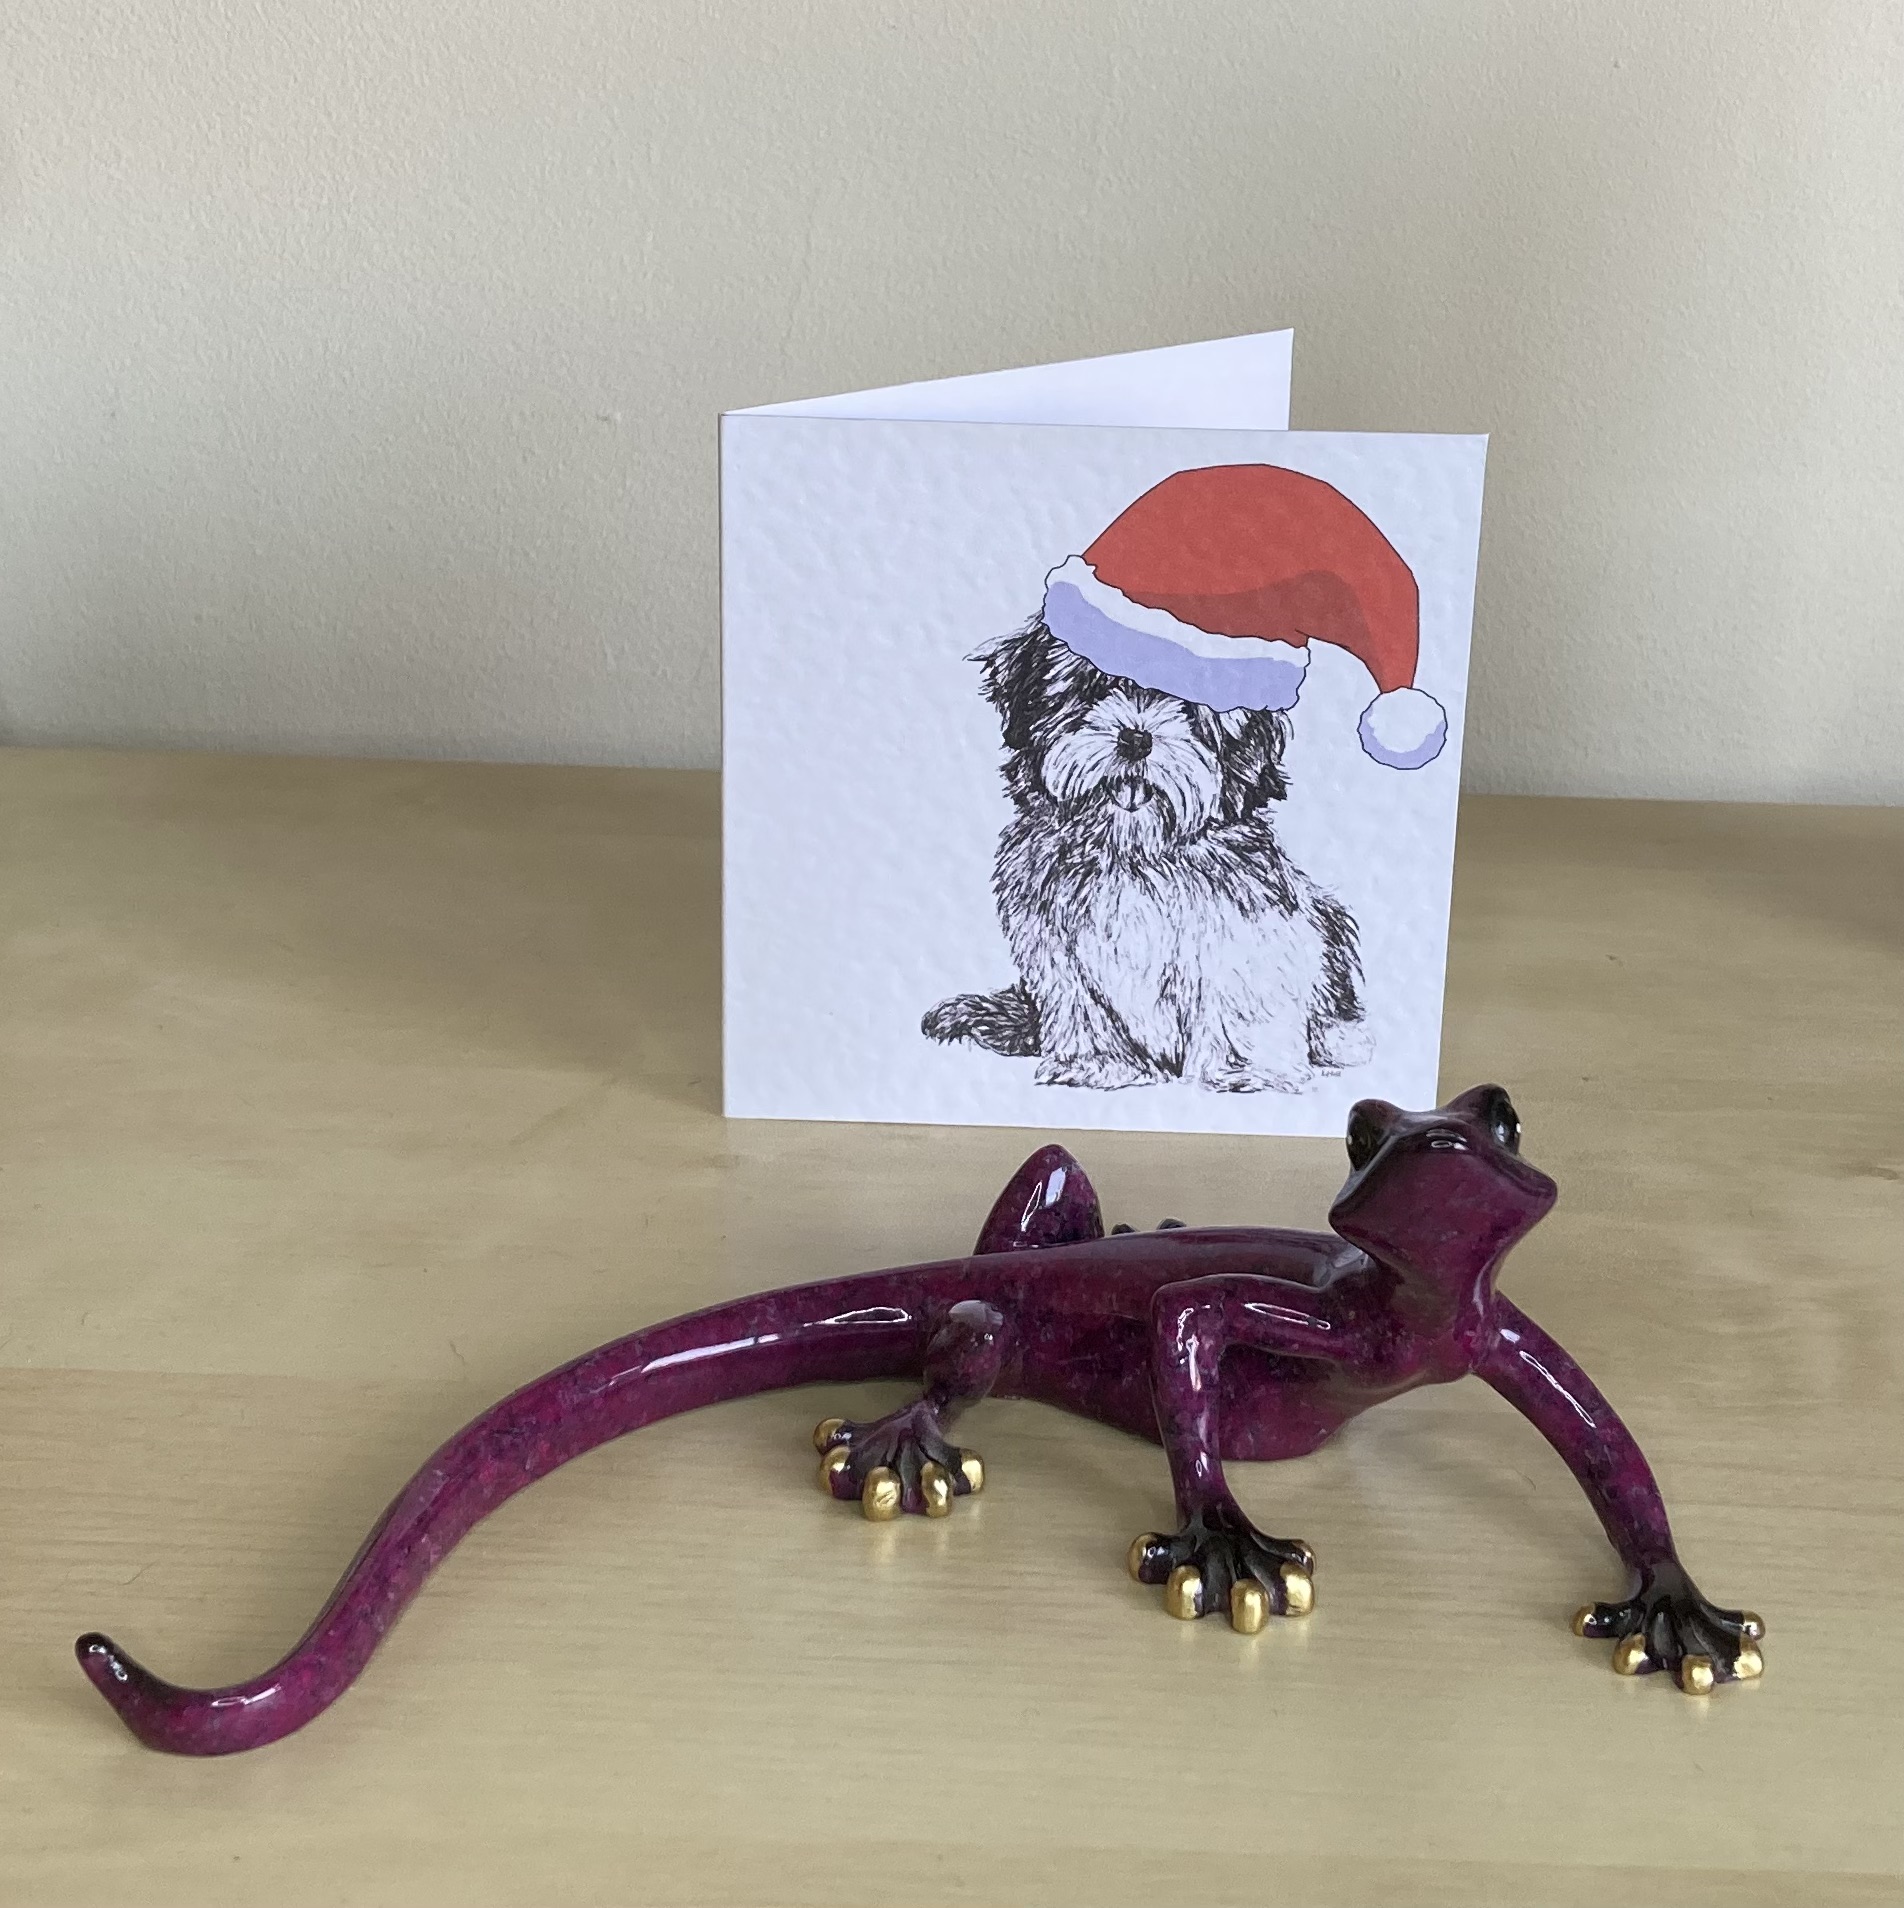 Lhasa Apso with Lhasa Apso hat Christmas card by Louisa Hill